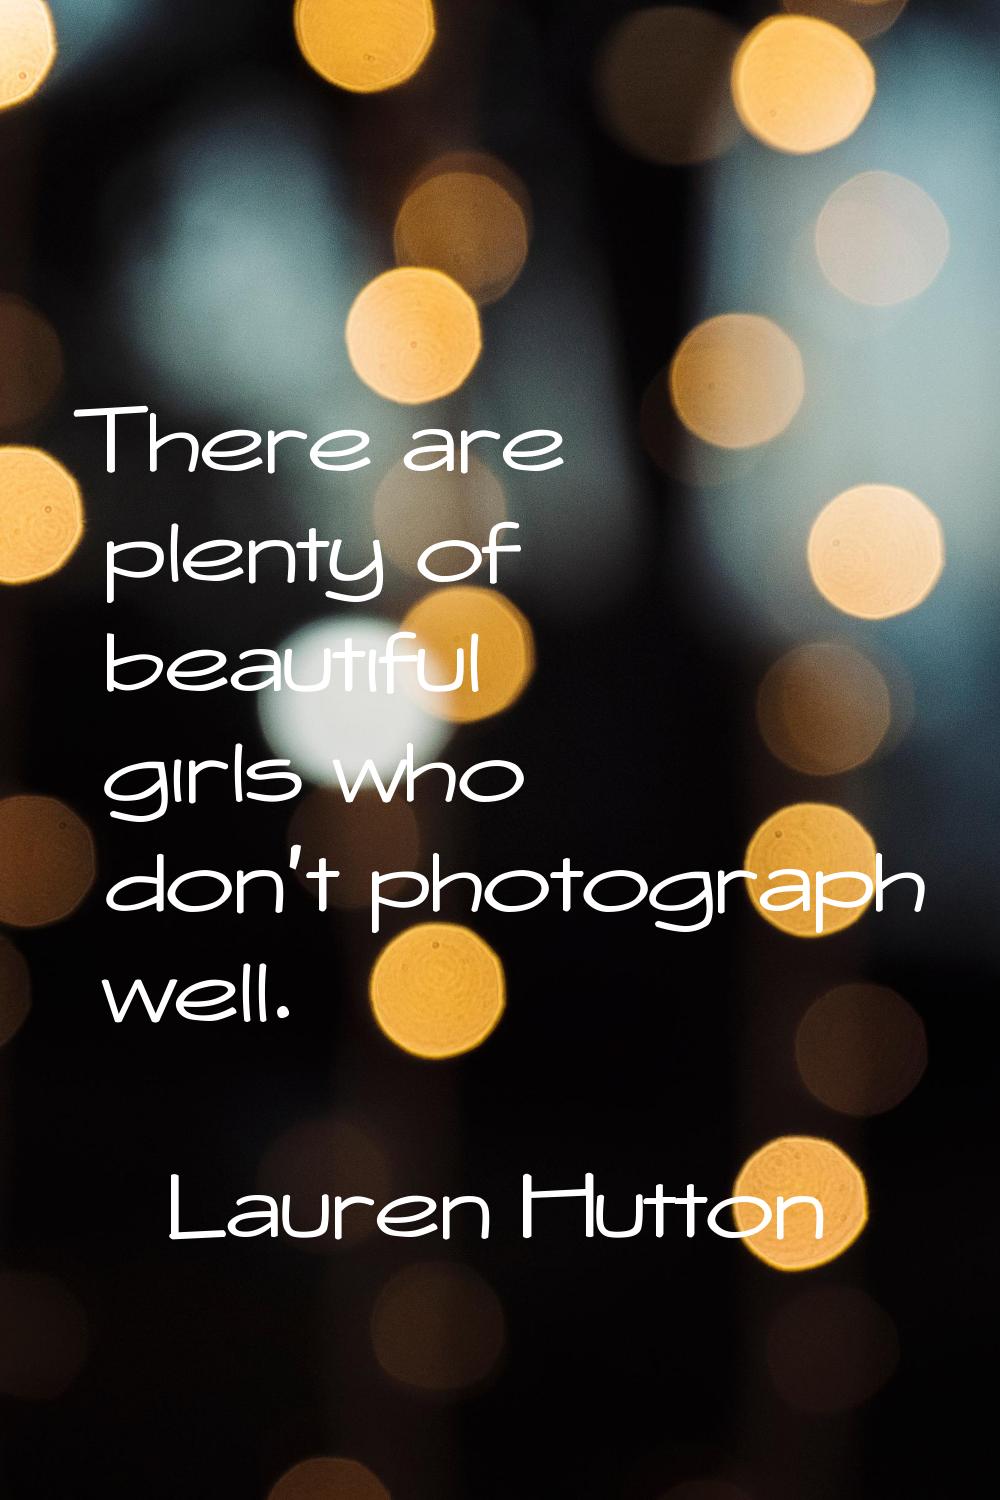 There are plenty of beautiful girls who don't photograph well.